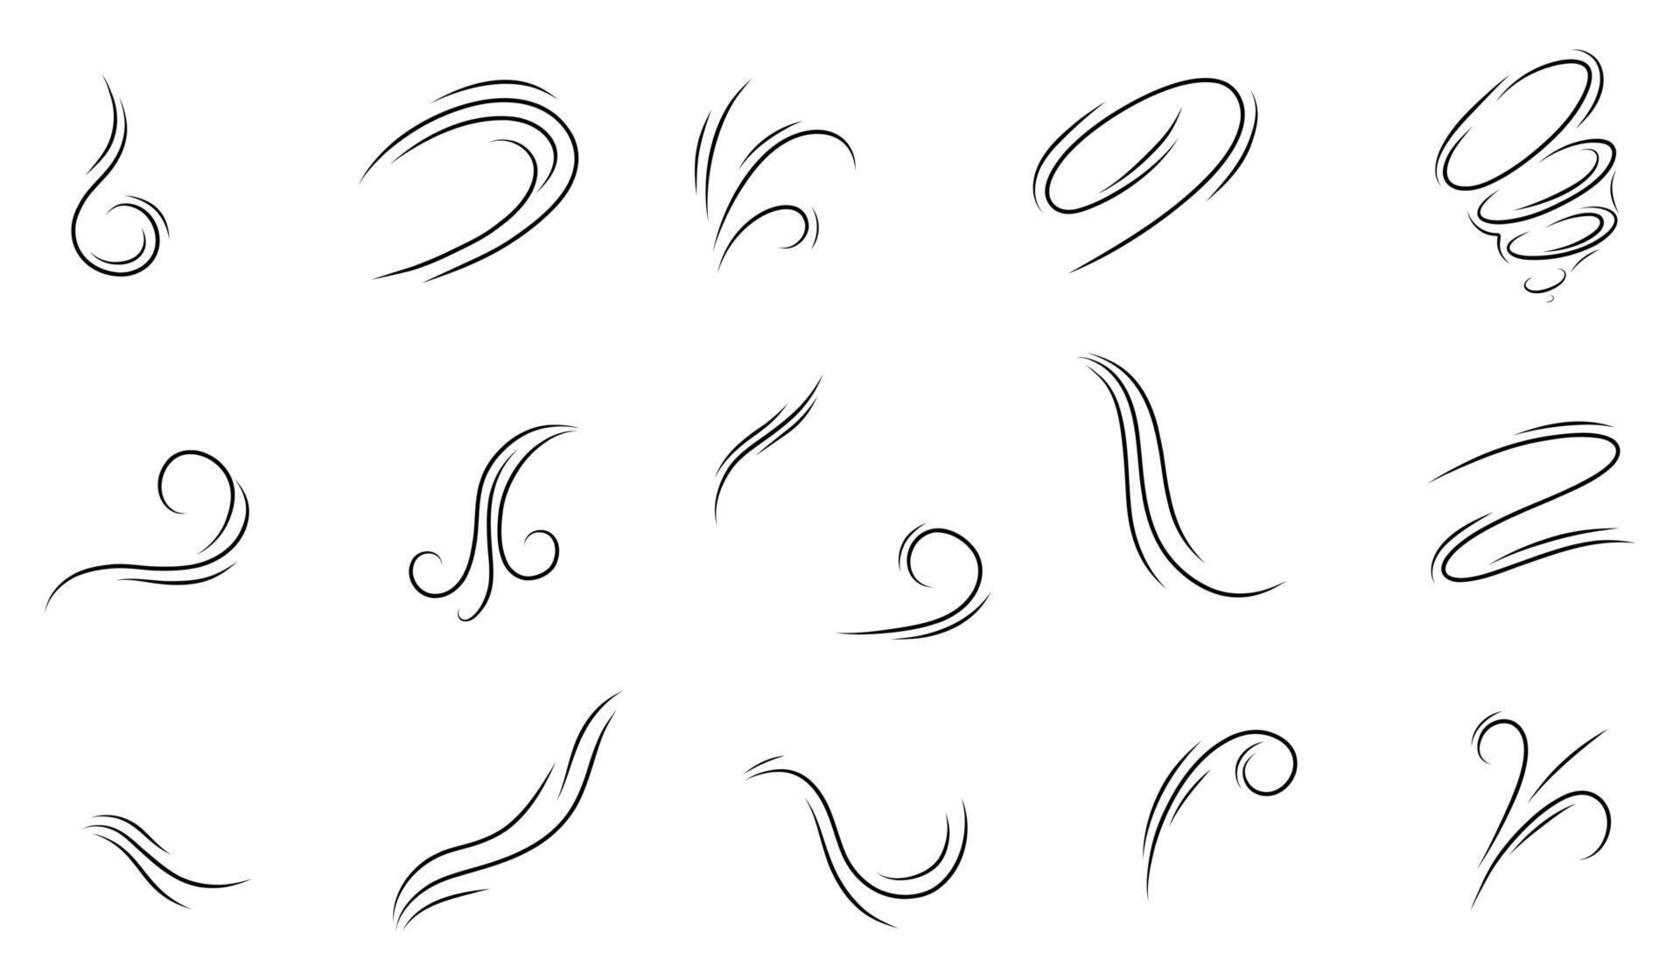 Set of wind blow set in doodle style, illustration on white background. A wave of cold air during windy weather. Rush symbol outline for print and design. graphics, air dynamics vector